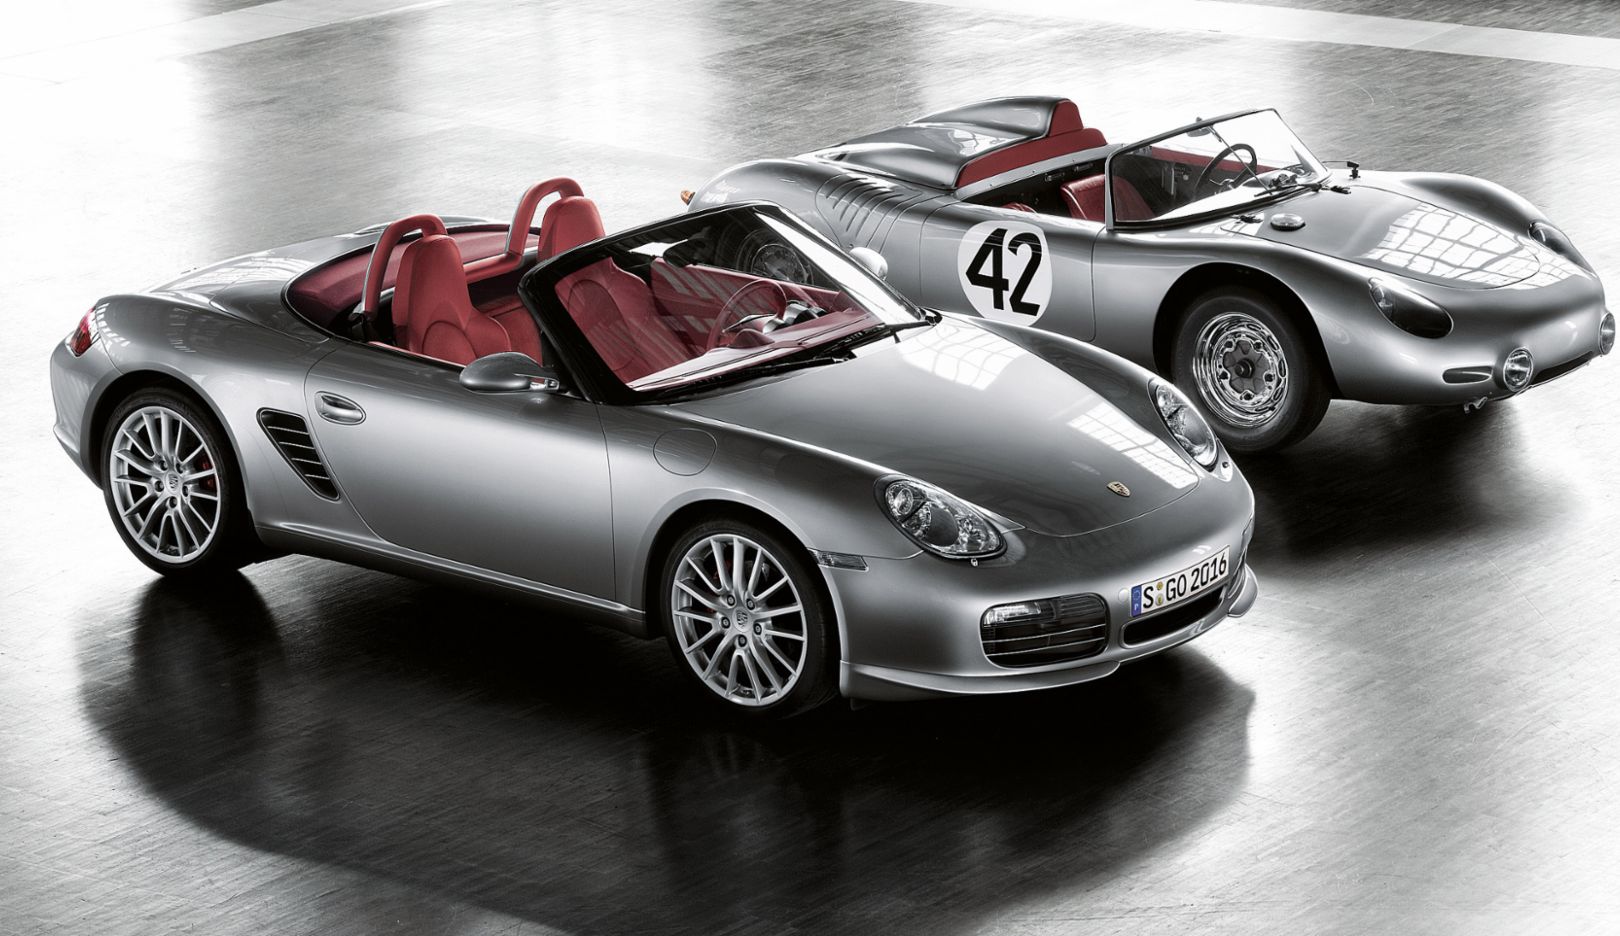 987 generation: Boxster RS 60 Spyder special edition (2007). With another exclusive special series of the Boxster S, Porsche commemorates Hans Herrmann and Olivier Gendebien’s historic triumph in 1960 at the twelve-hour race in Sebring, Florida. The Boxster RS 60 Spyder makes its début in March 2008, shortly after Hans Herrmann's eightieth birthday.